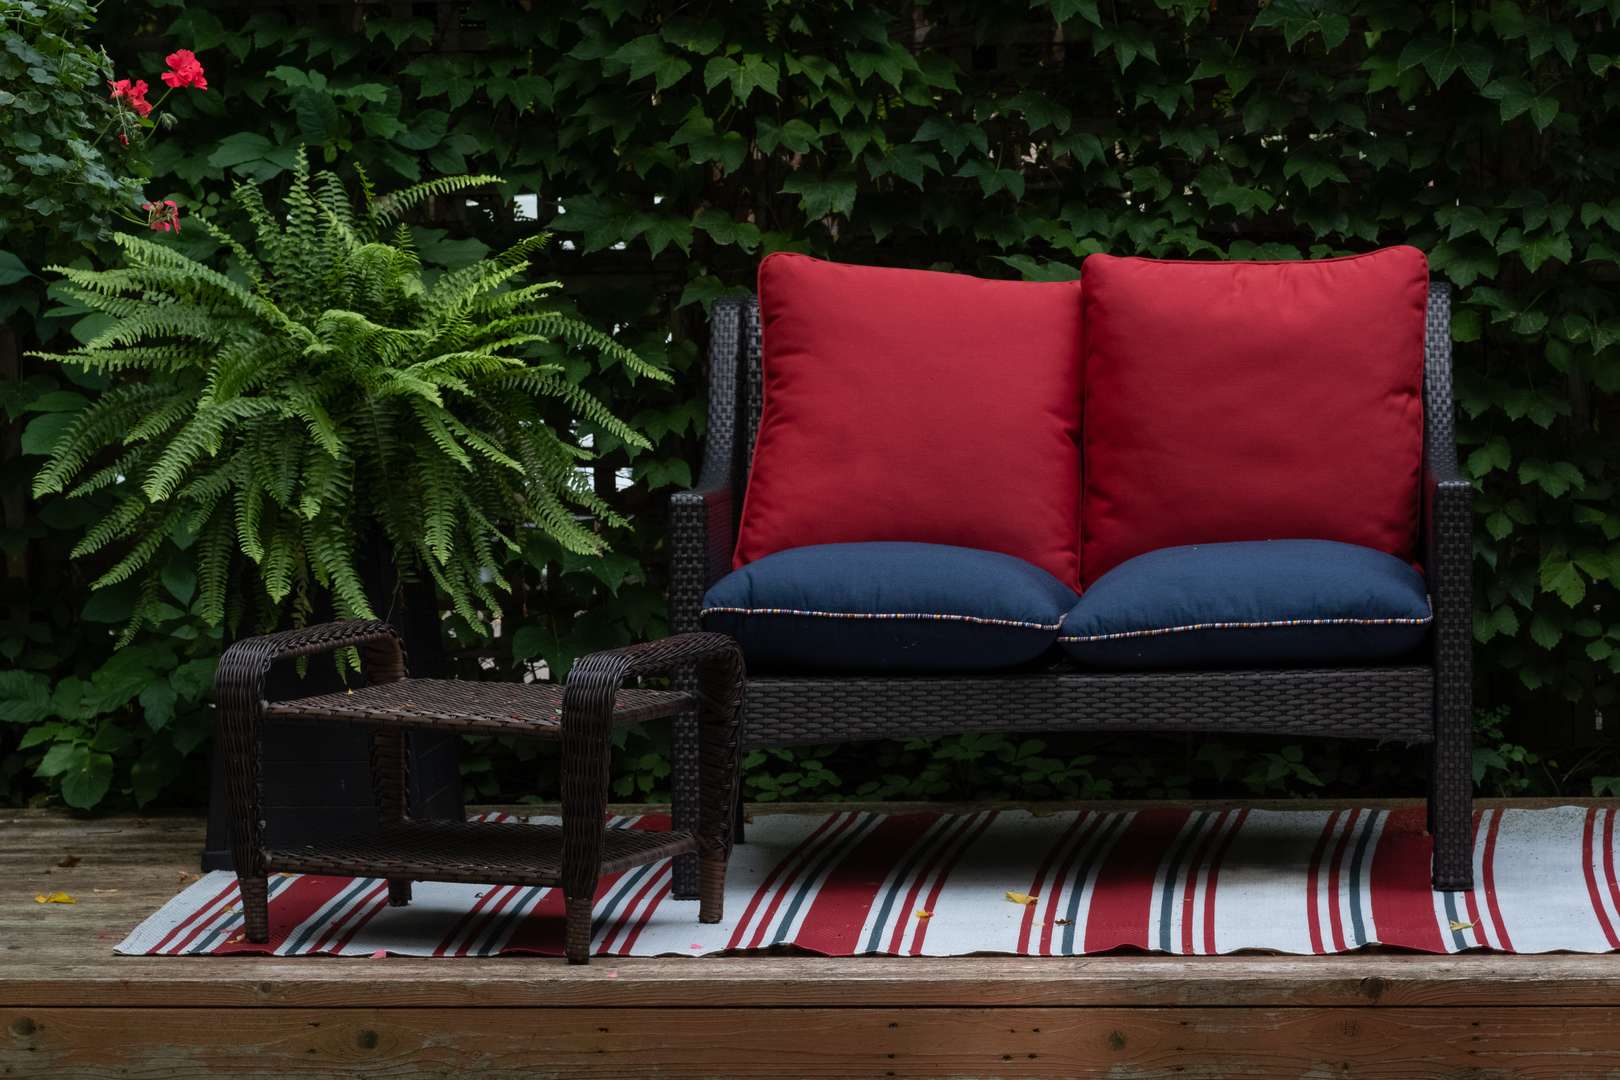 3 Trends in Outdoor Furniture Industry For 2023